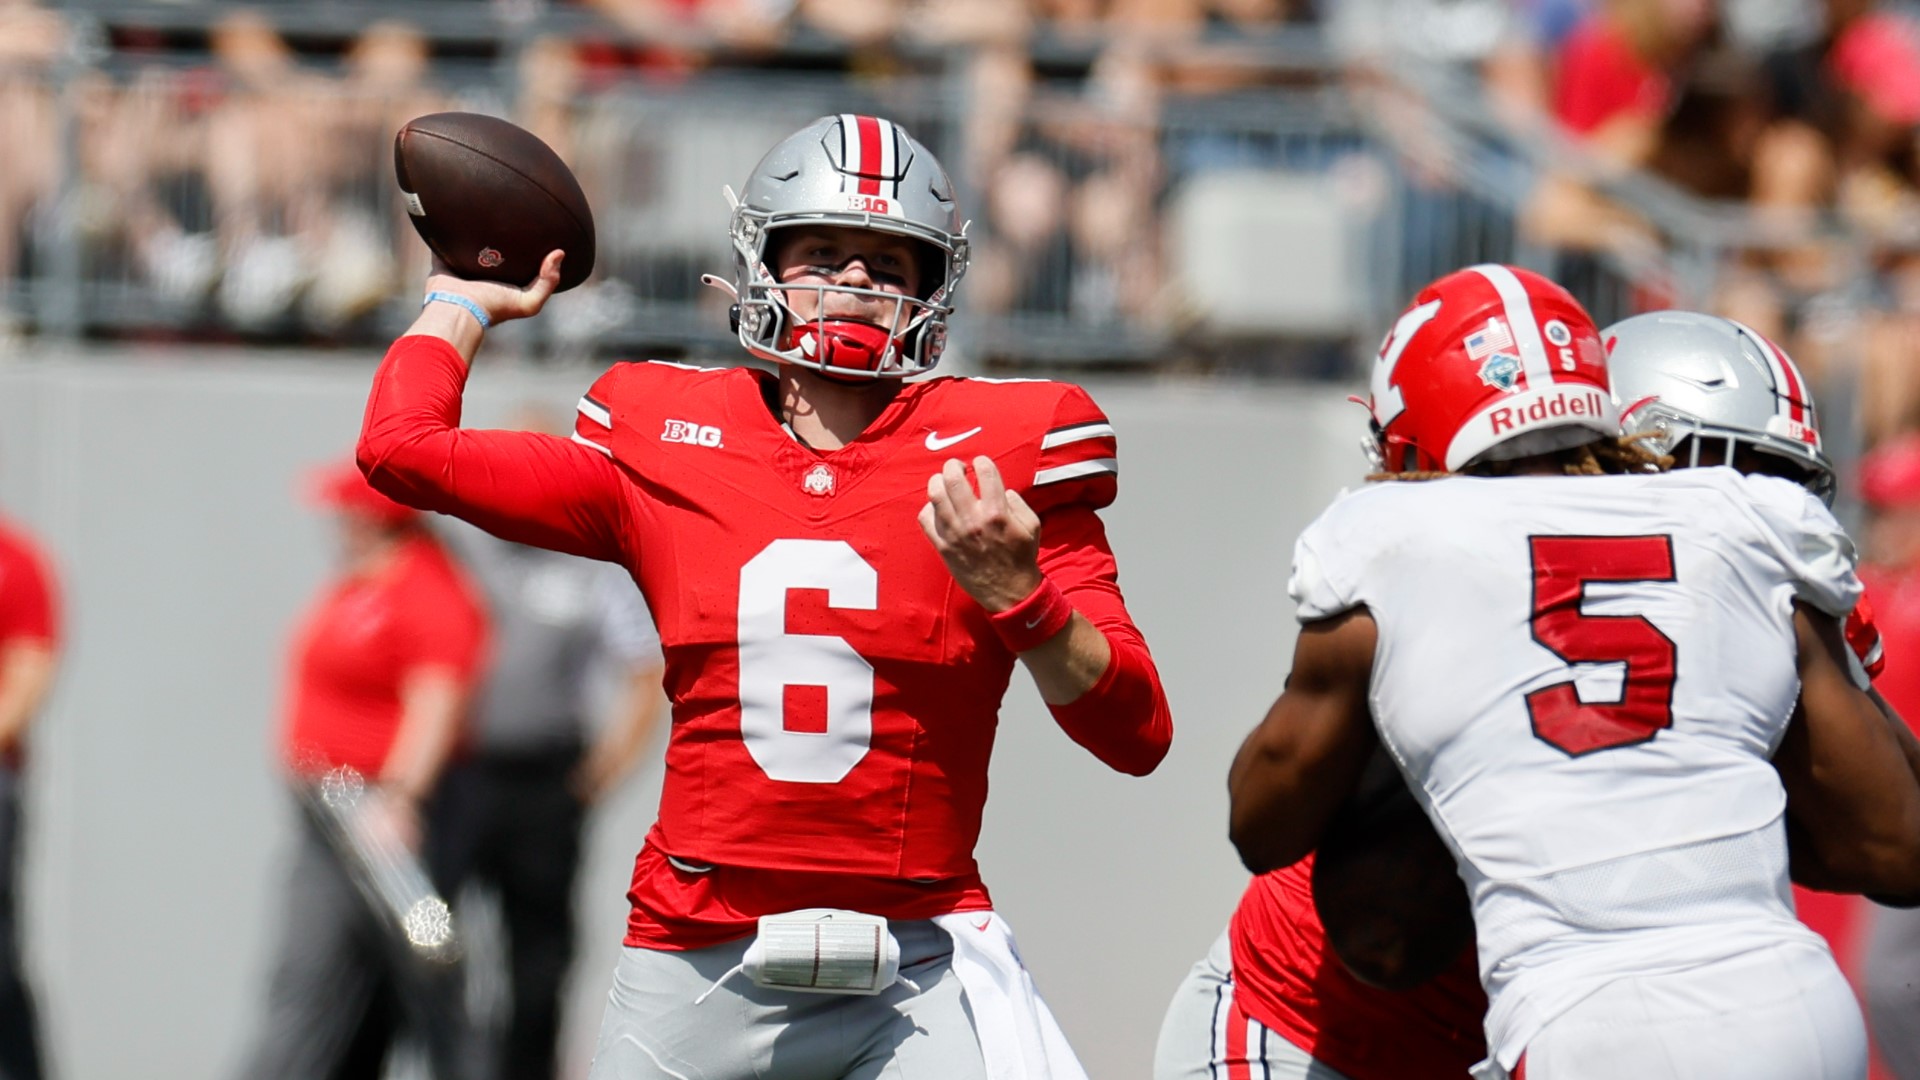 Ohio State head coach Ryan Day named third-year quarterback Kyle McCord the starter moving forward.